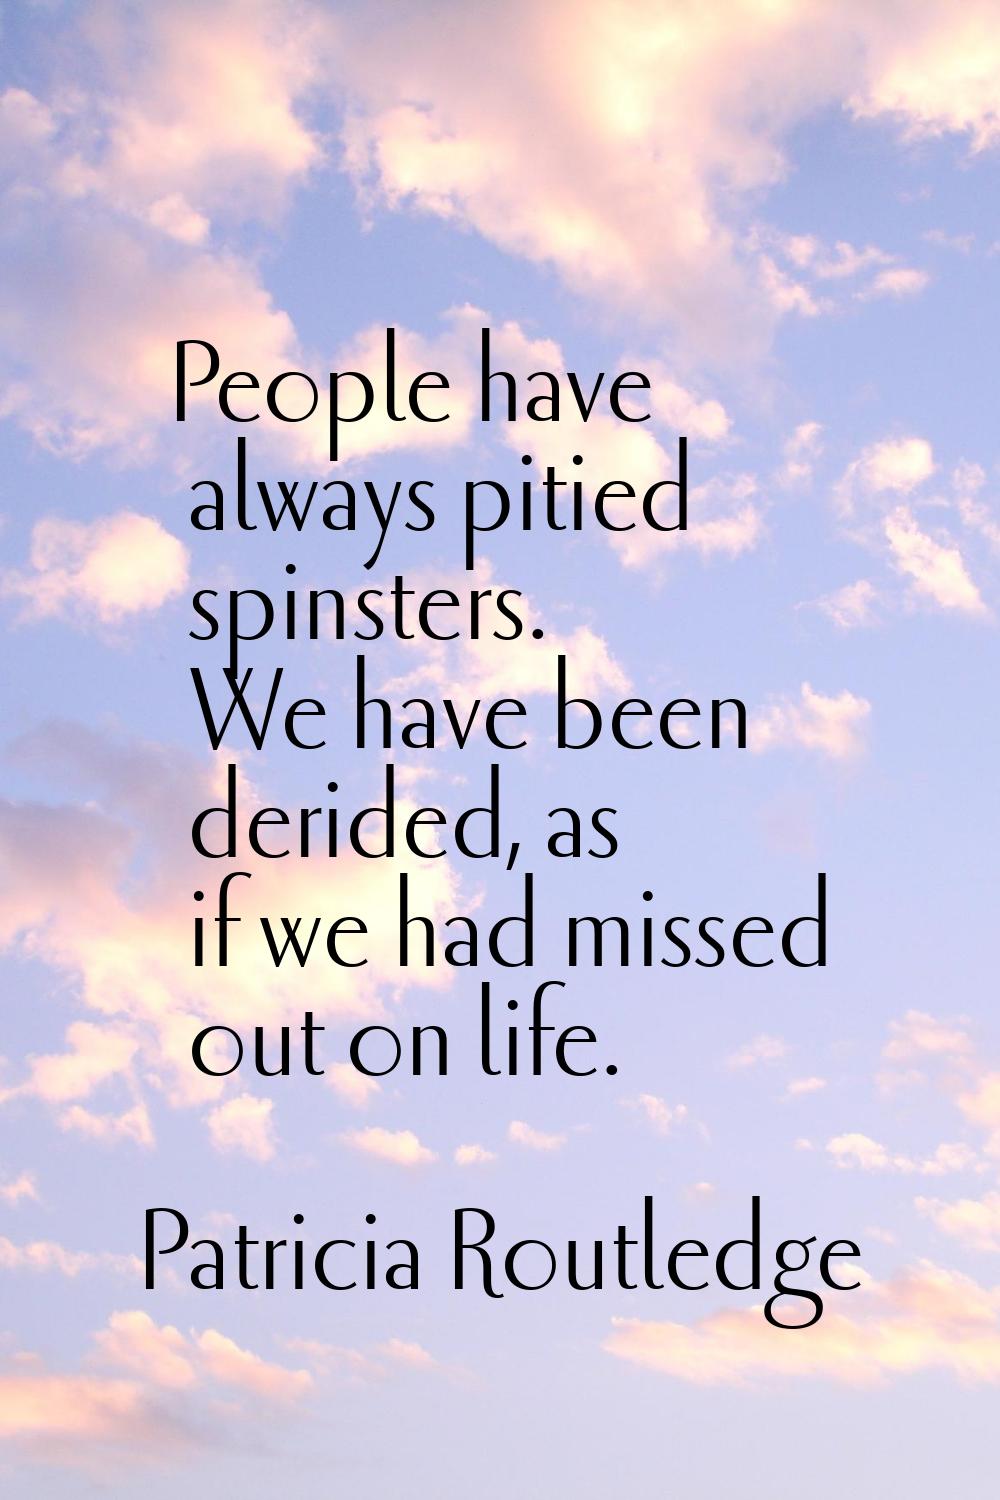 People have always pitied spinsters. We have been derided, as if we had missed out on life.